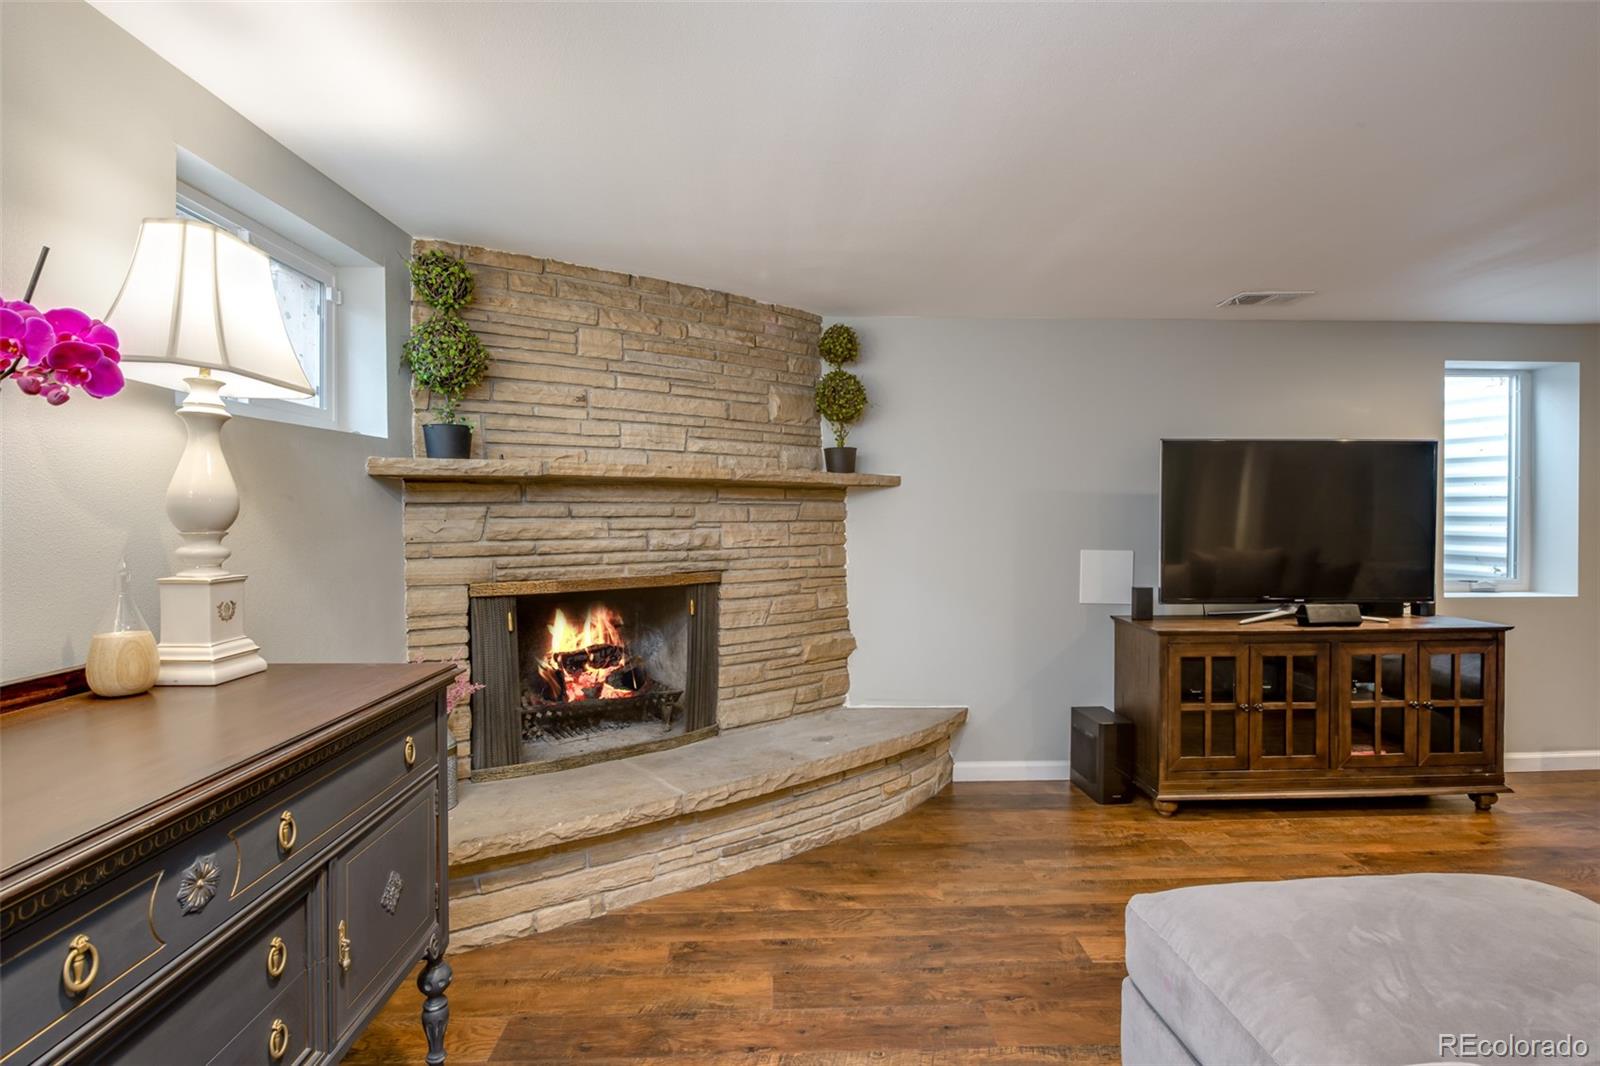 Beehive Fireplace Makeover Awesome 898 S Grape Street Denver Co Virginia Vale sold Listing Mls